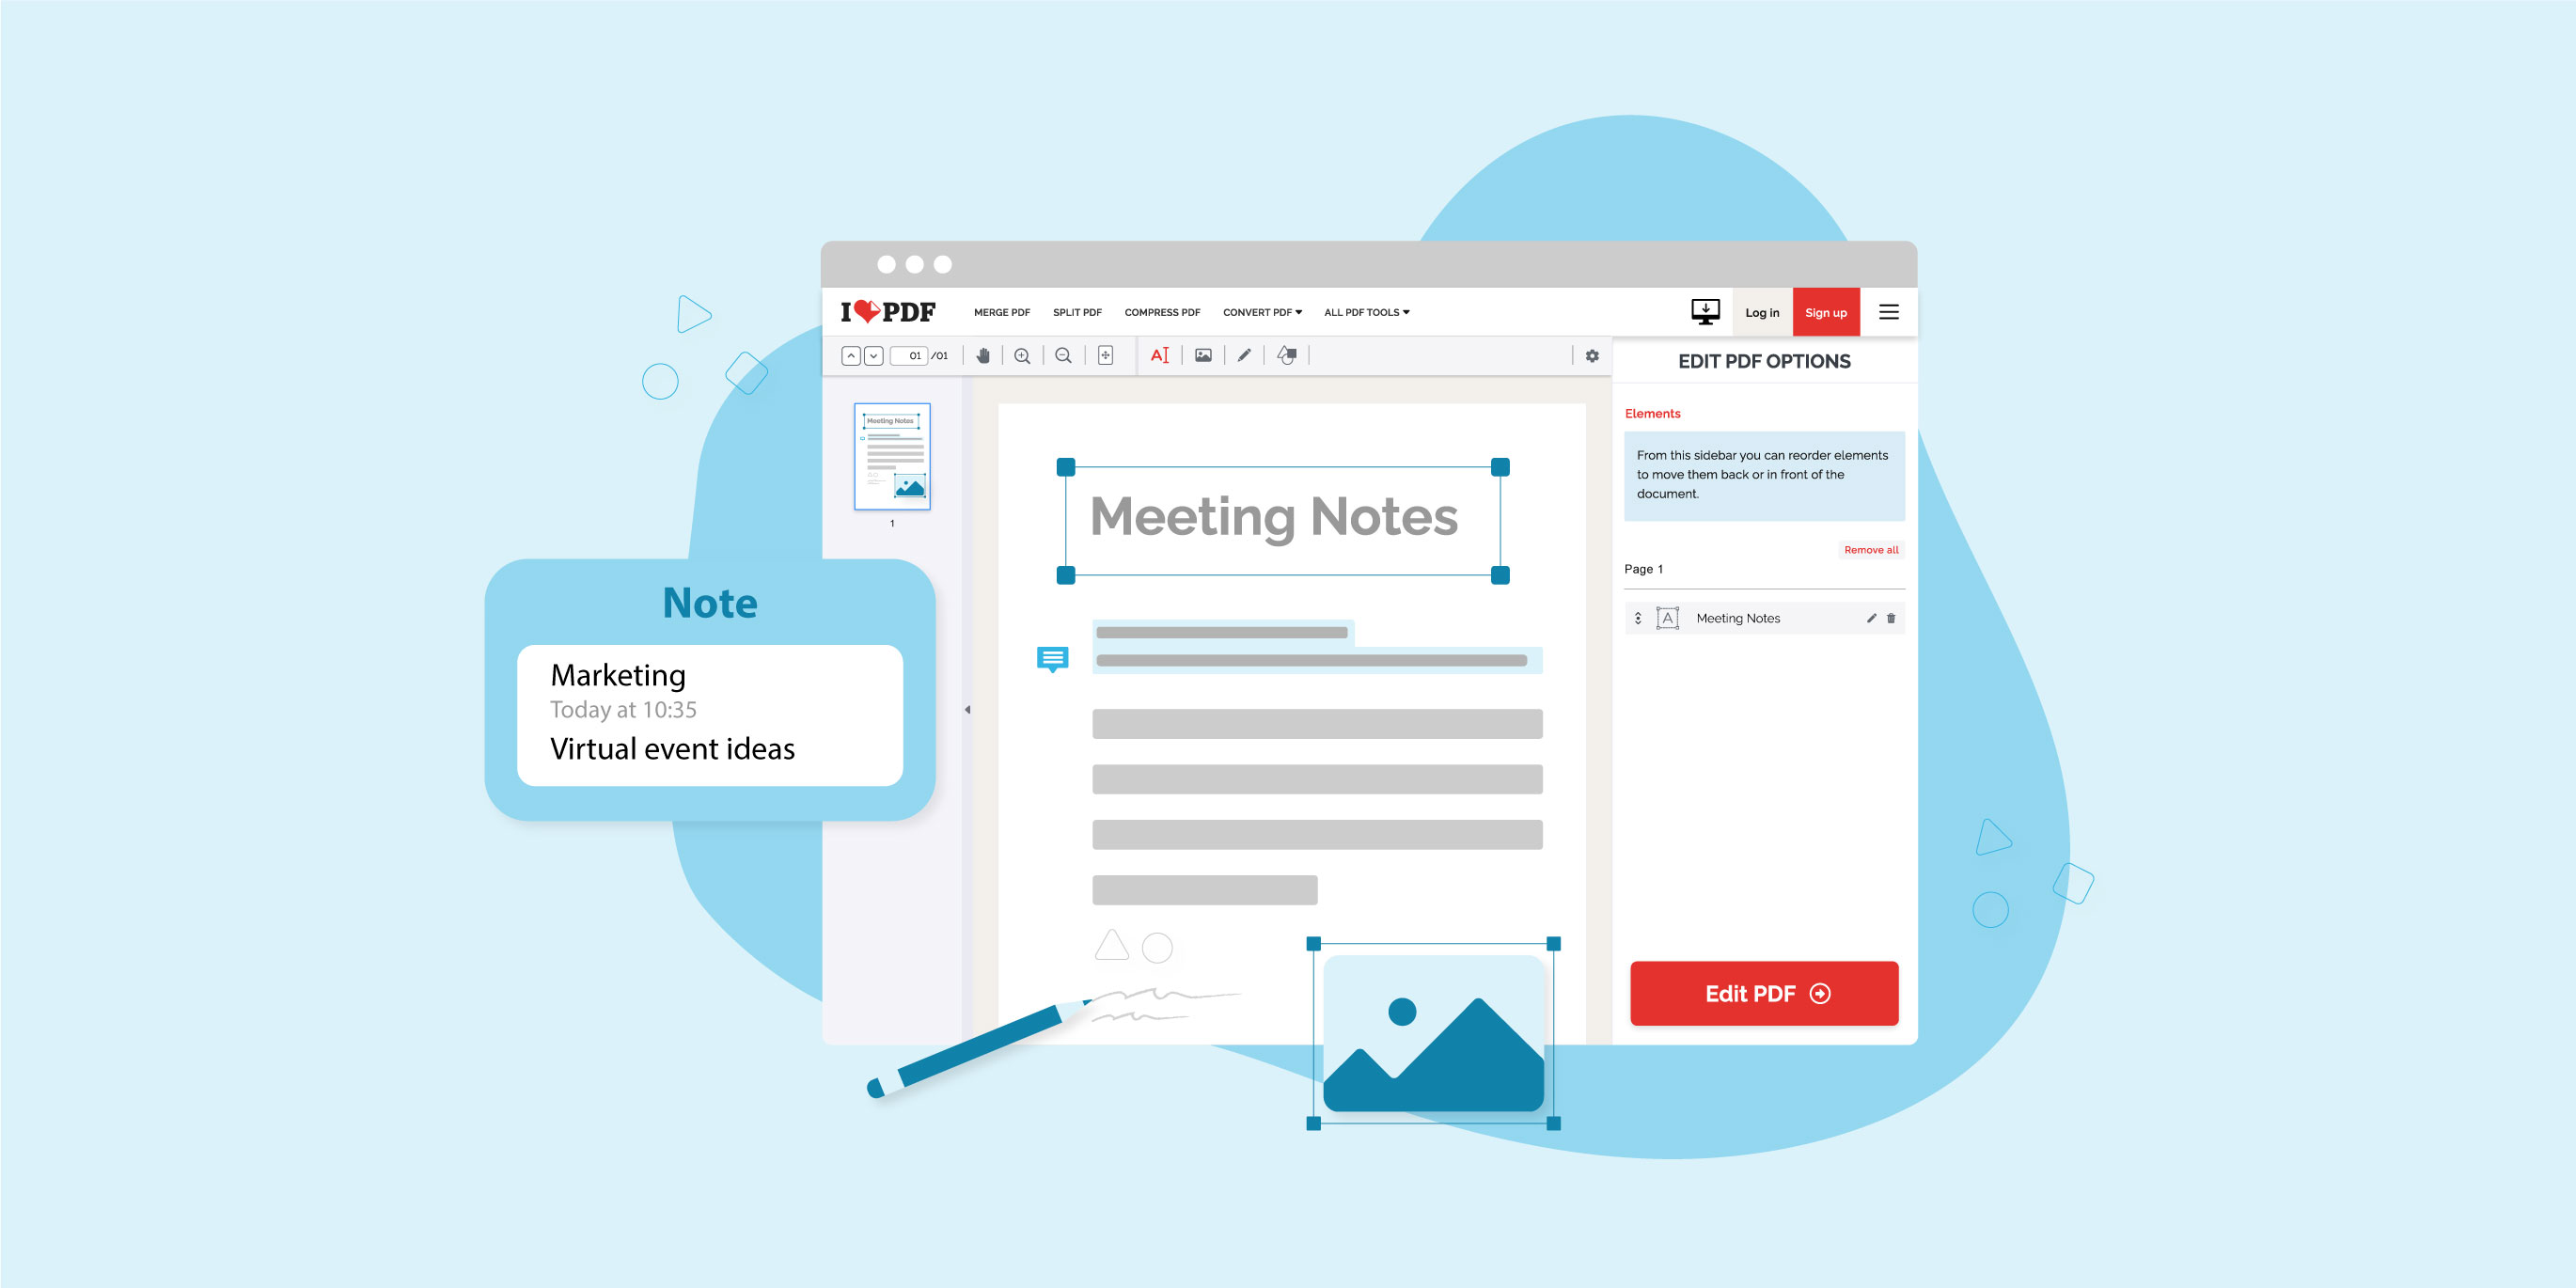 Annotate your meeting notes&nbsp;